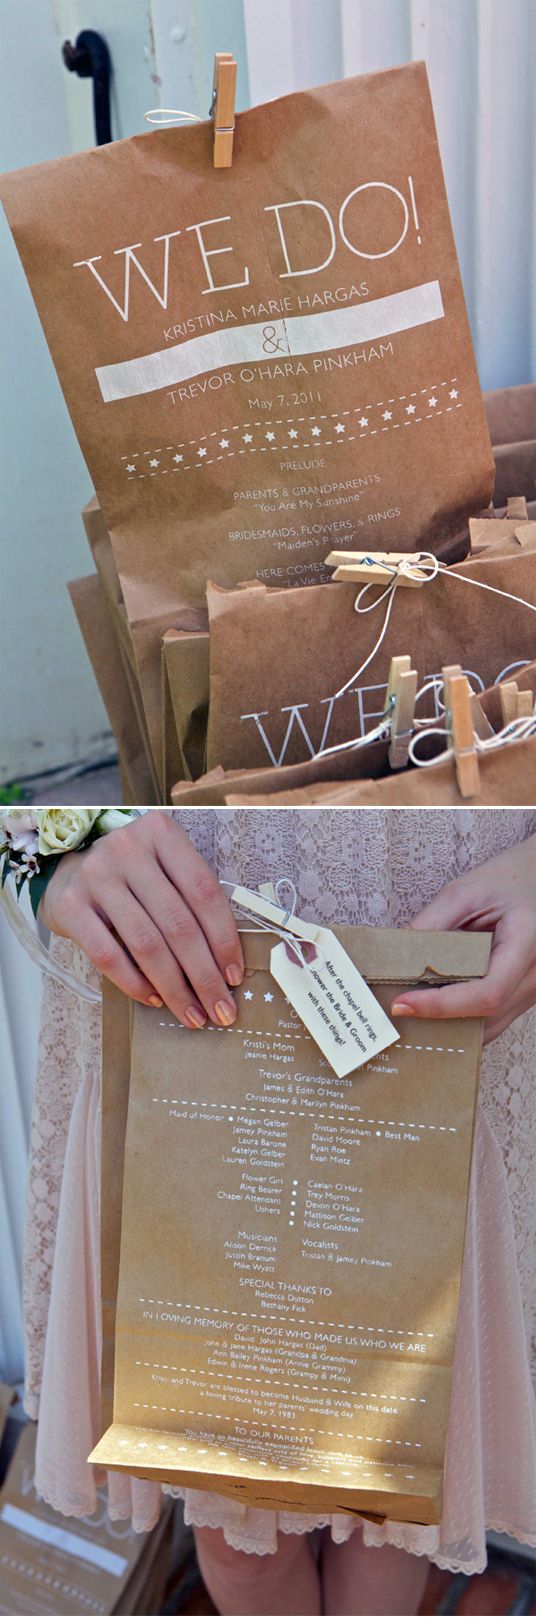 wedding program on brown bags with confetti for the toss - absolutely love this.